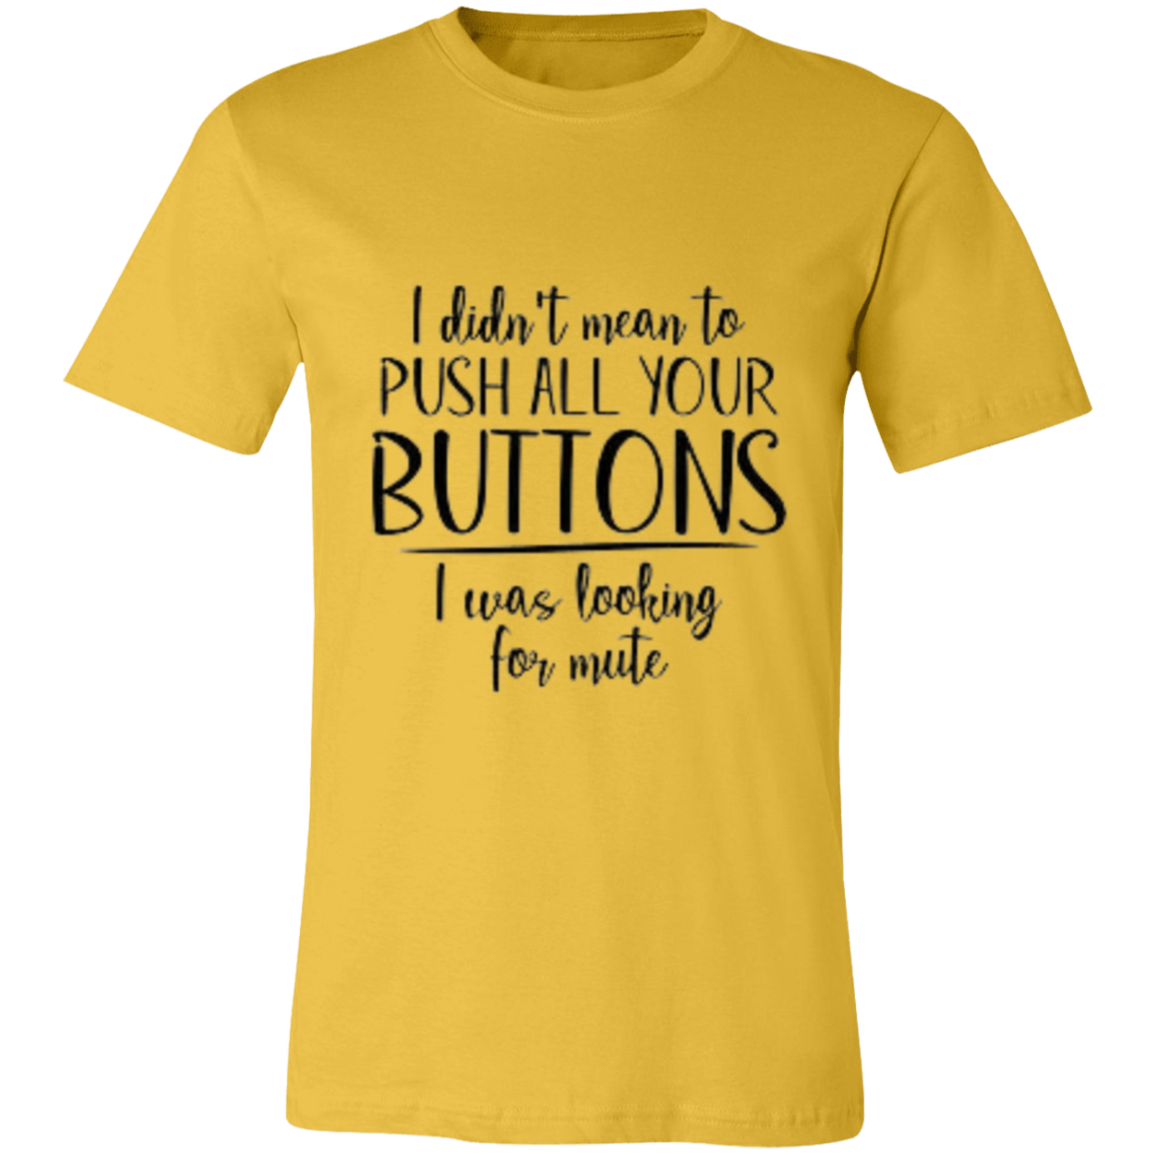 I Didn't Mean to Push Your Buttons Unisex Jersey Short-Sleeve T-Shirt